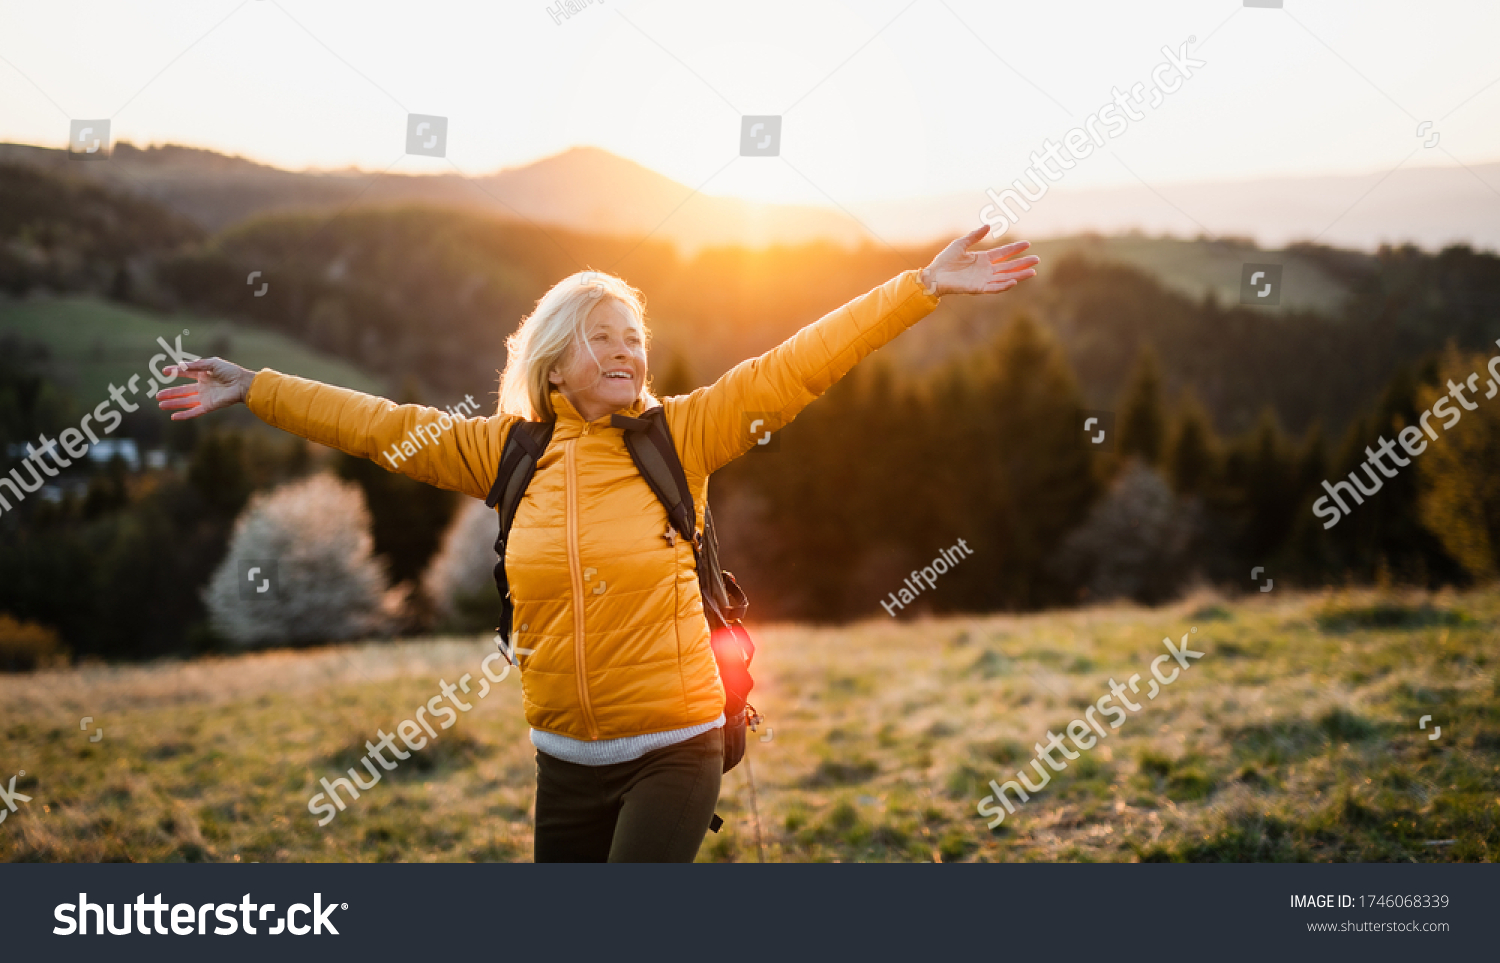 Front view of senior woman hiker standing outdoors in nature at sunset. #1746068339